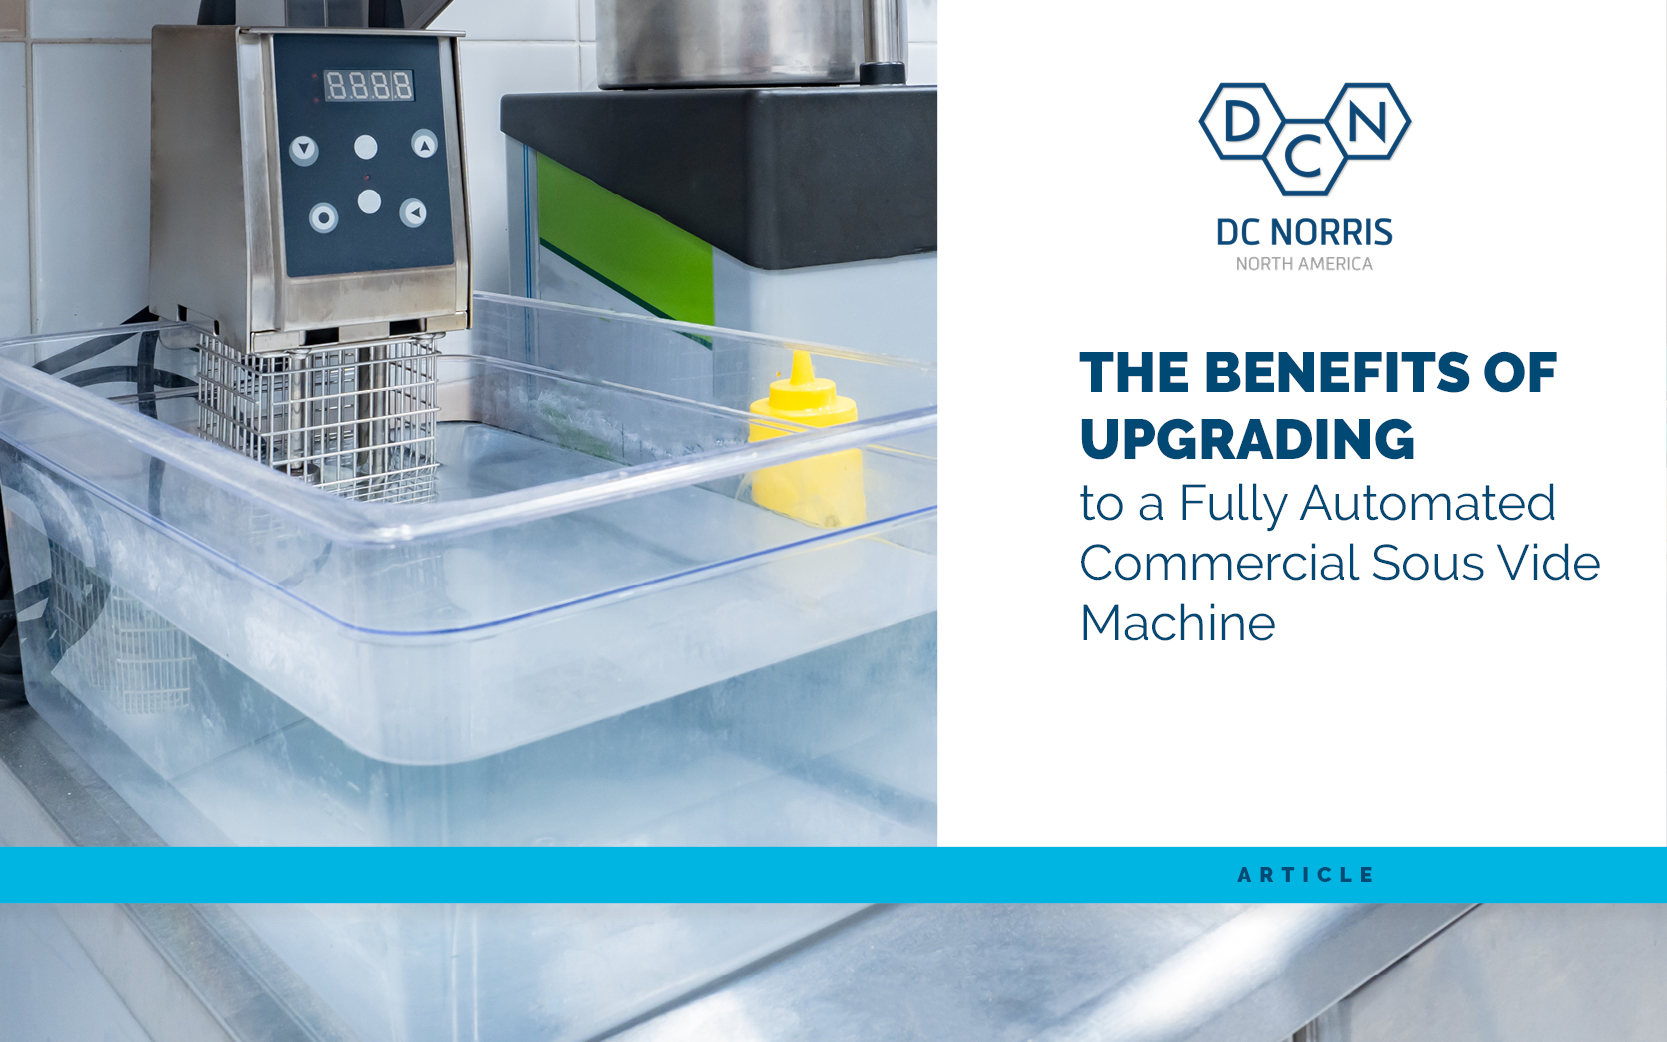 The Benefits of Upgrading to a Fully Automated Commercial Sous Vide Machine